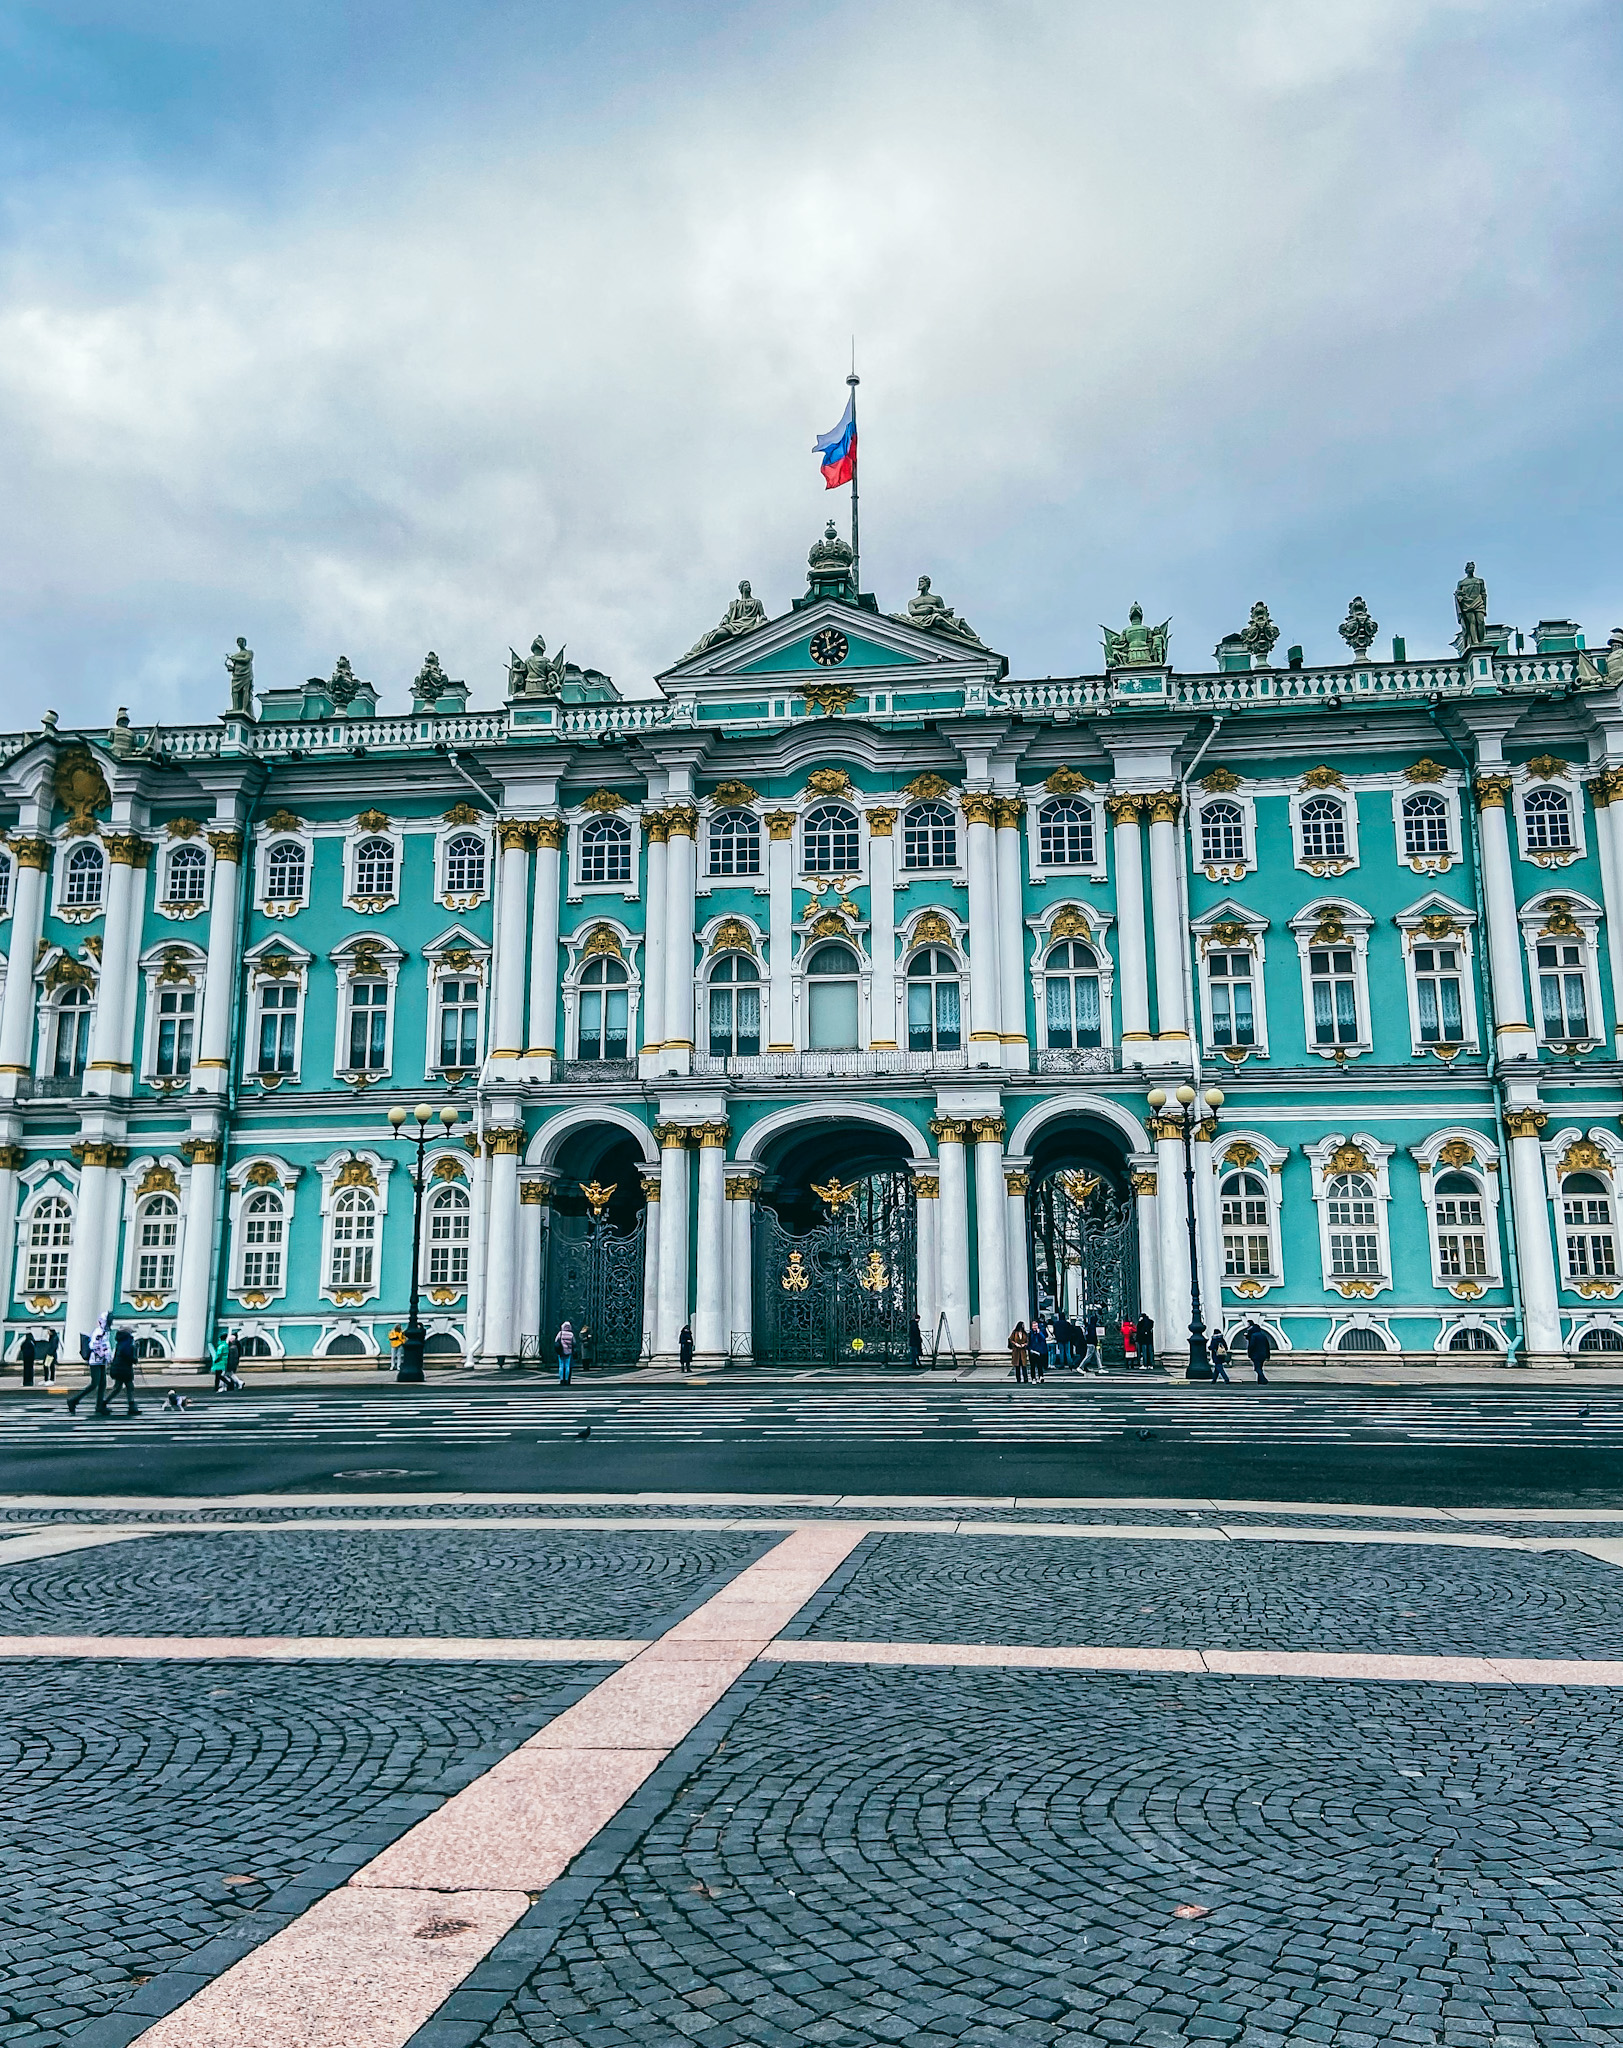 The Hermitage holds the second largest art collection in the world. It is also part of the stunning Winter Palace.